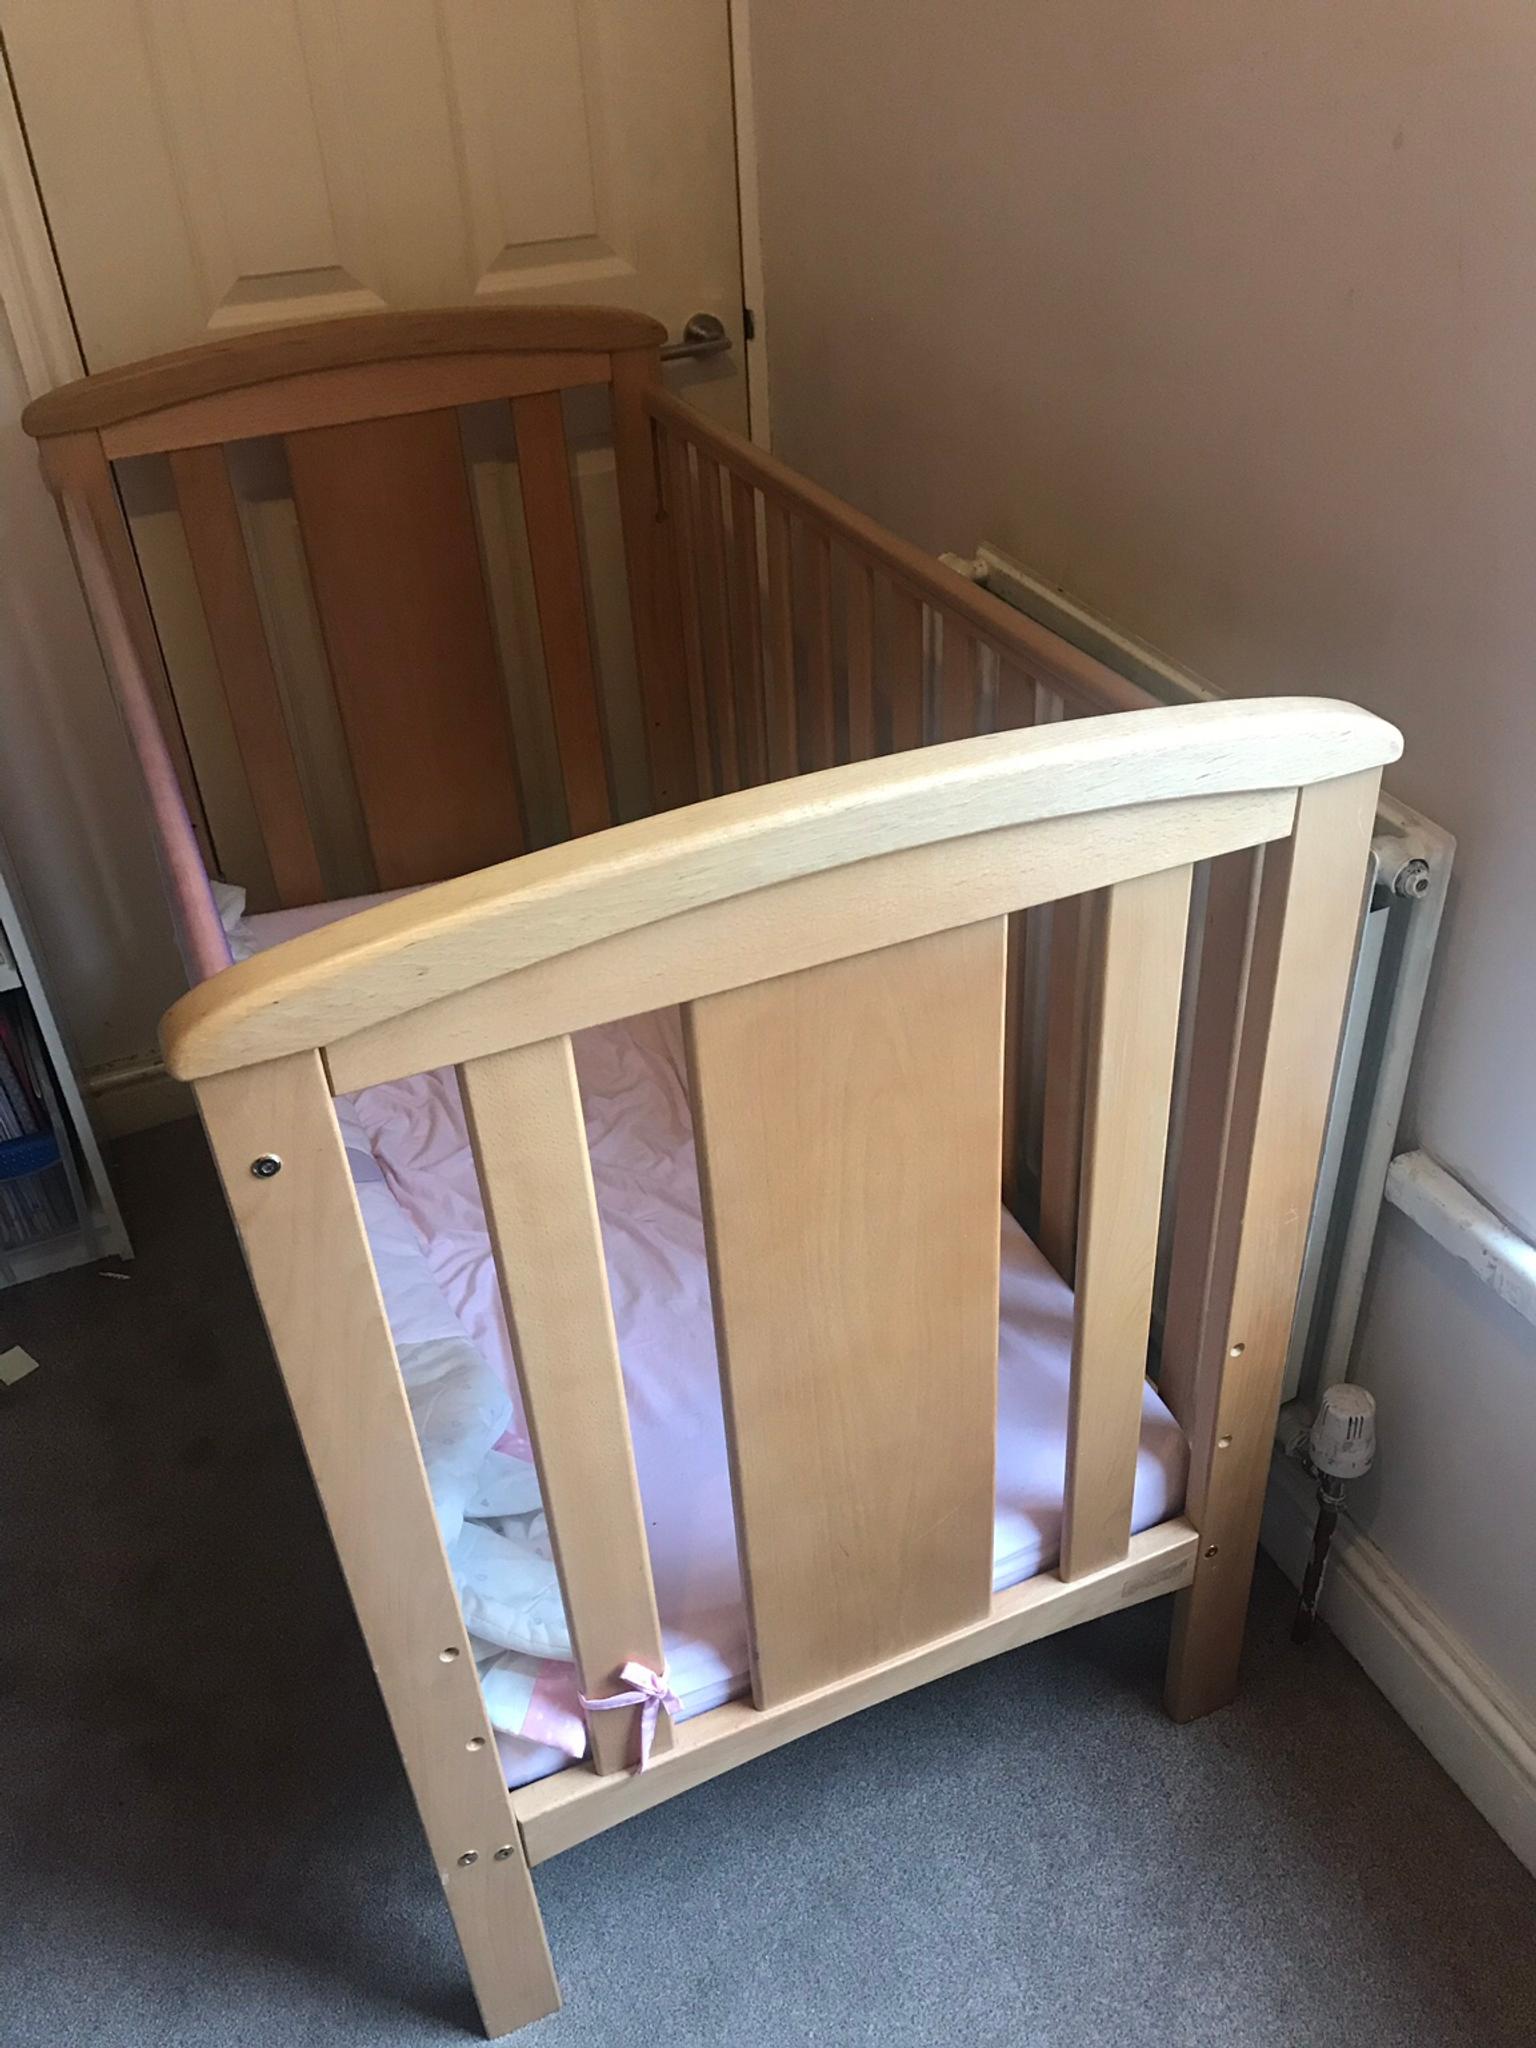 East Coast Cot in LU1 Luton for £60.00 